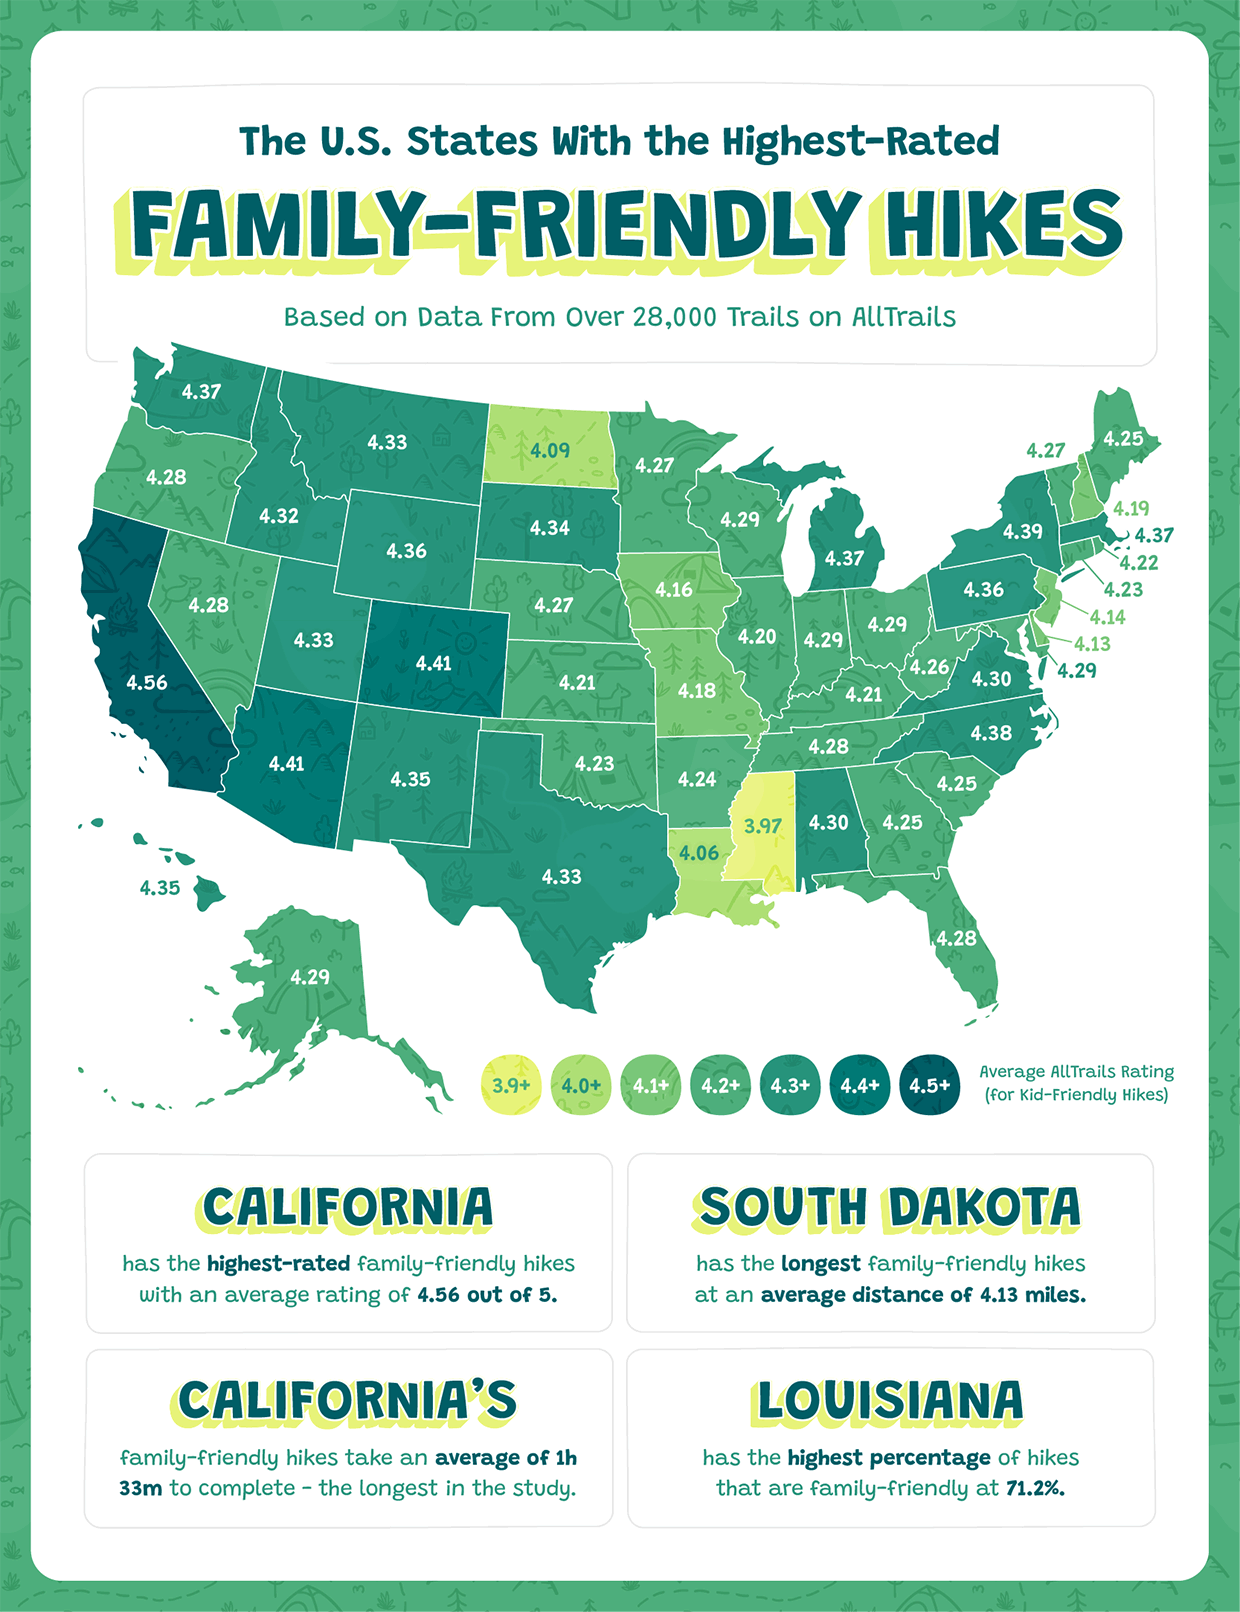 A heatmap showing the states with the highest-rated family-friendly hiking options